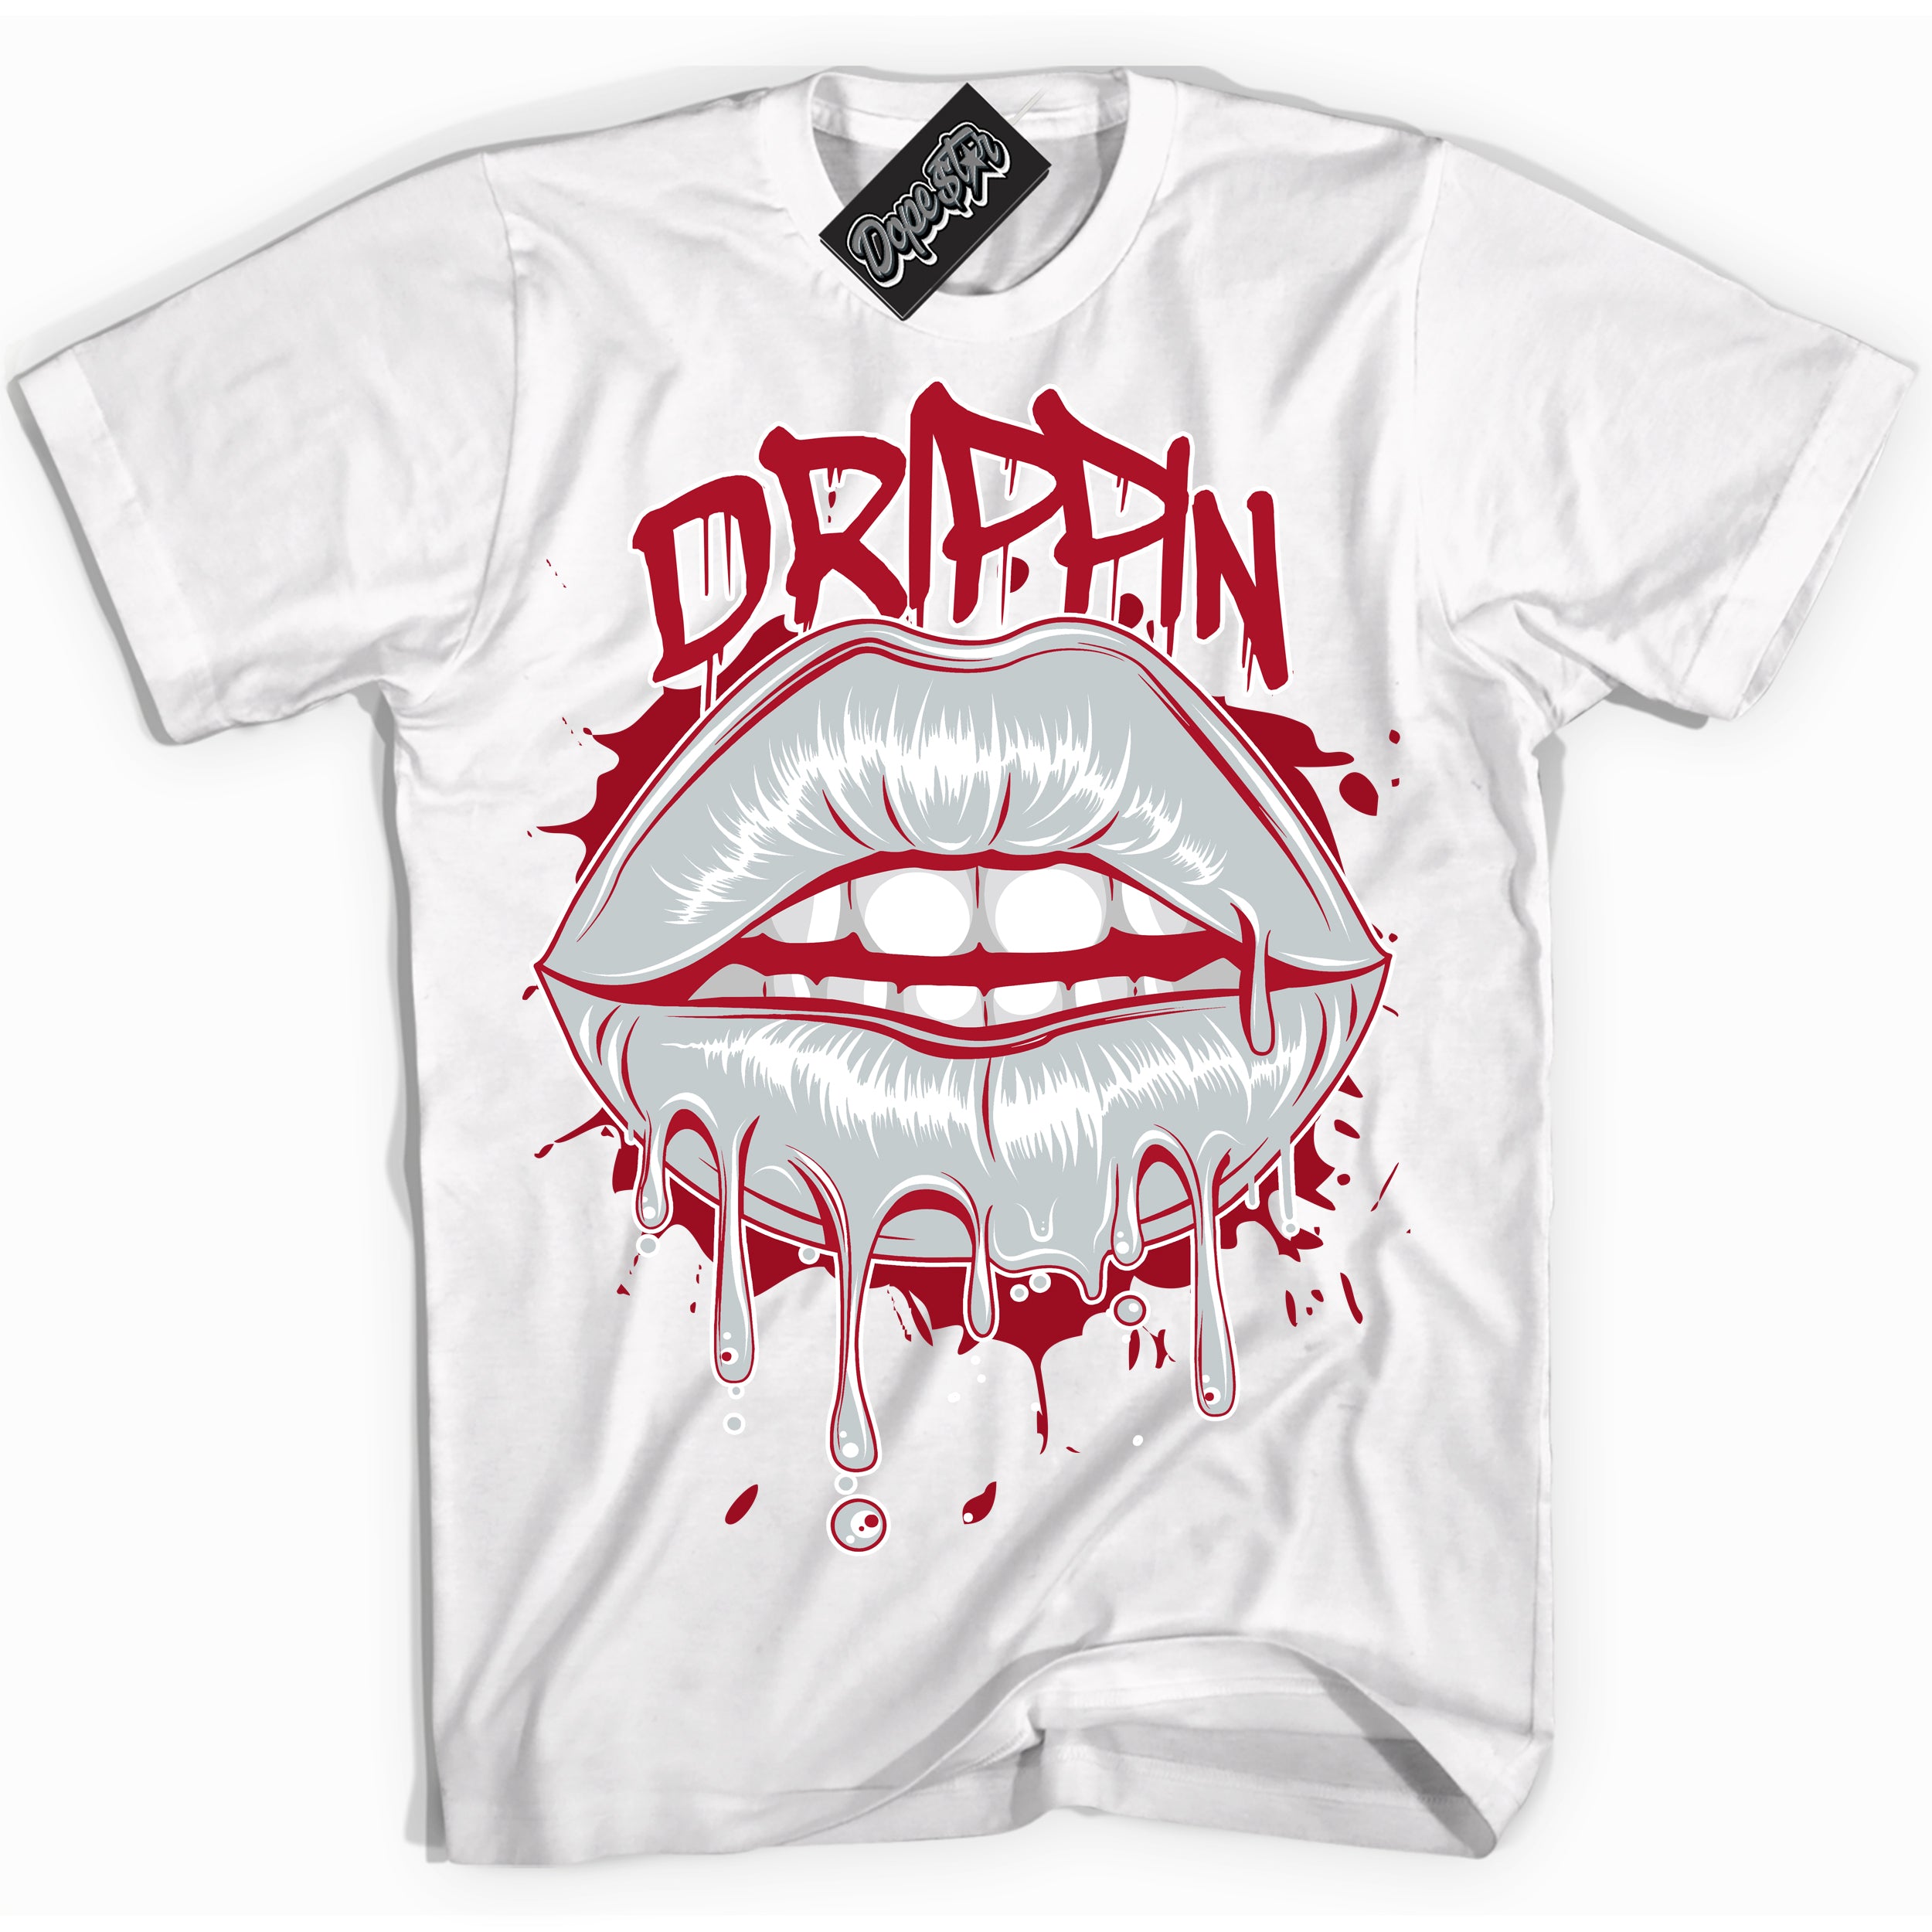 Cool White Shirt with “ Drippin ” design that perfectly matches Reverse Ultraman Sneakers.